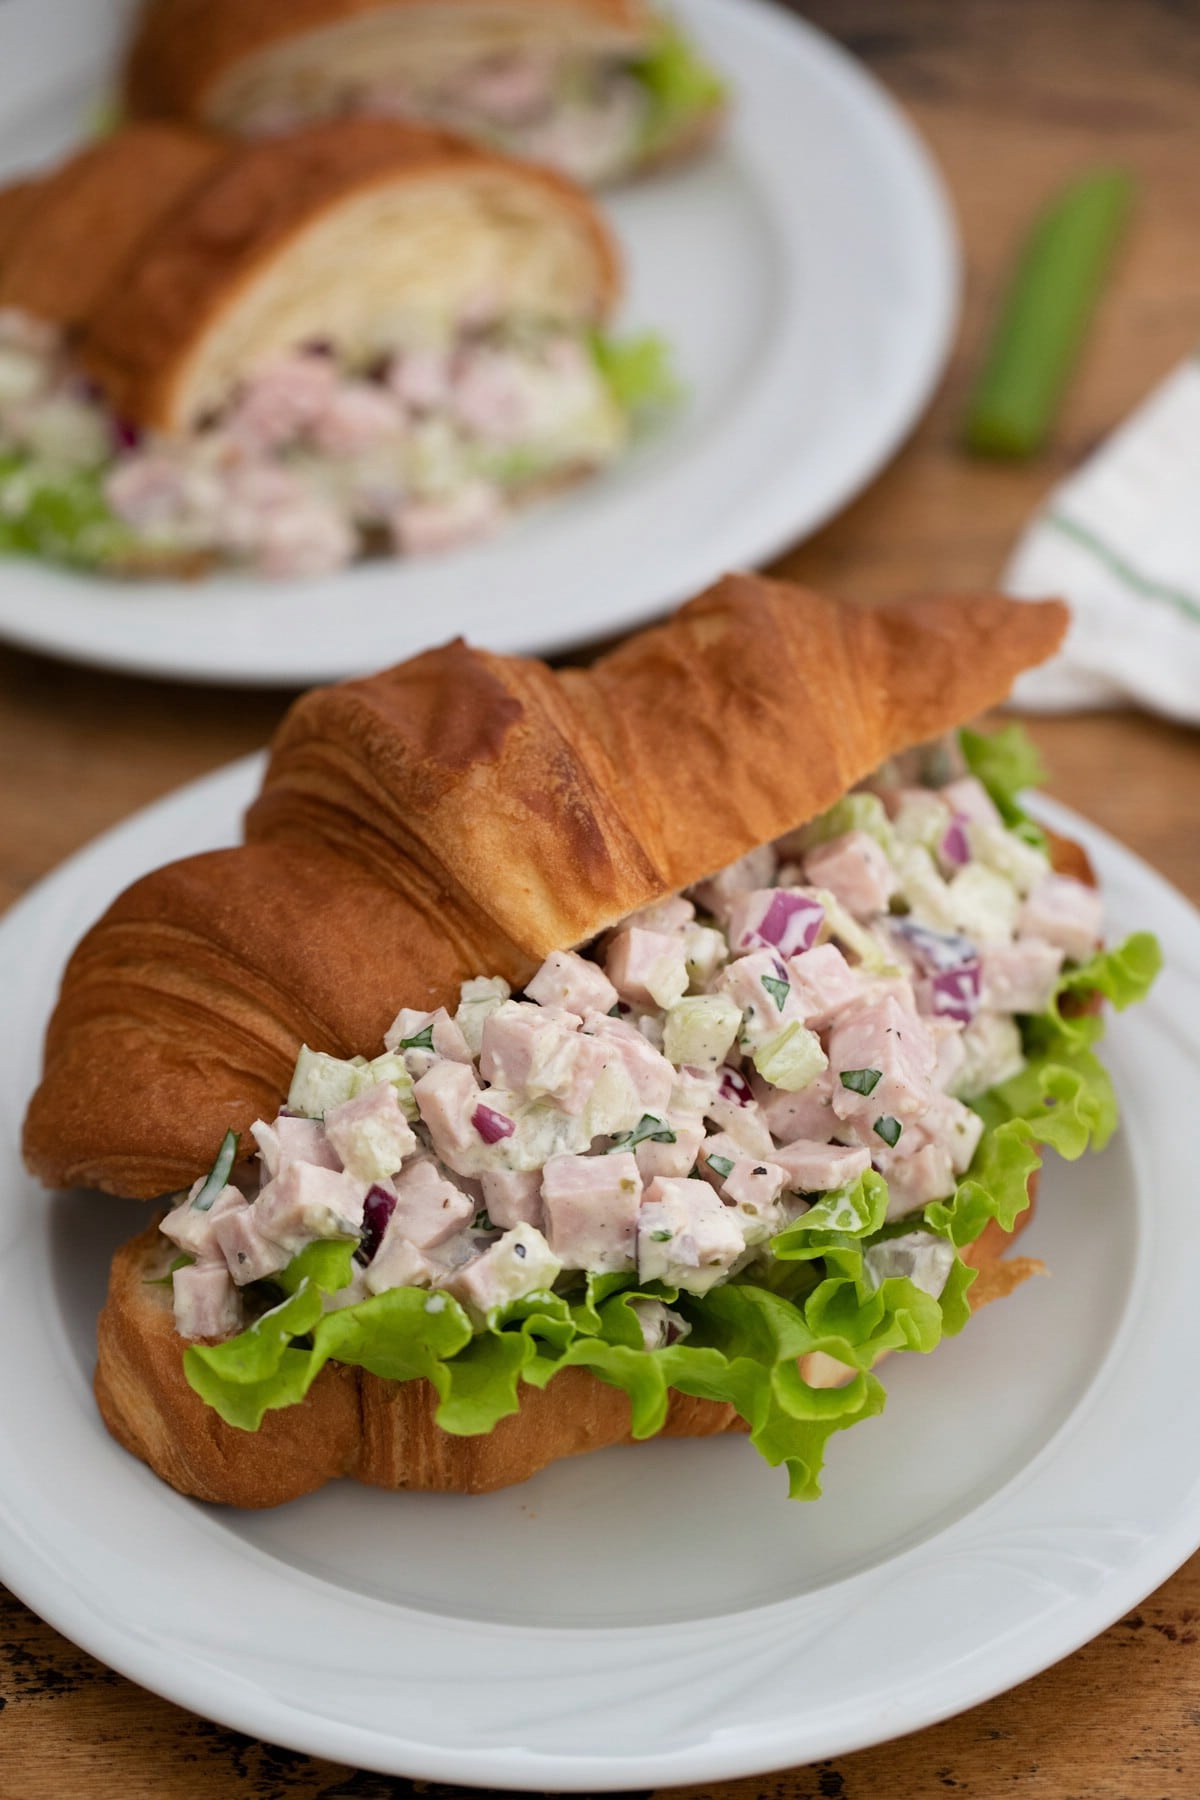 Crossiant with ham salad and lettuce on white plate